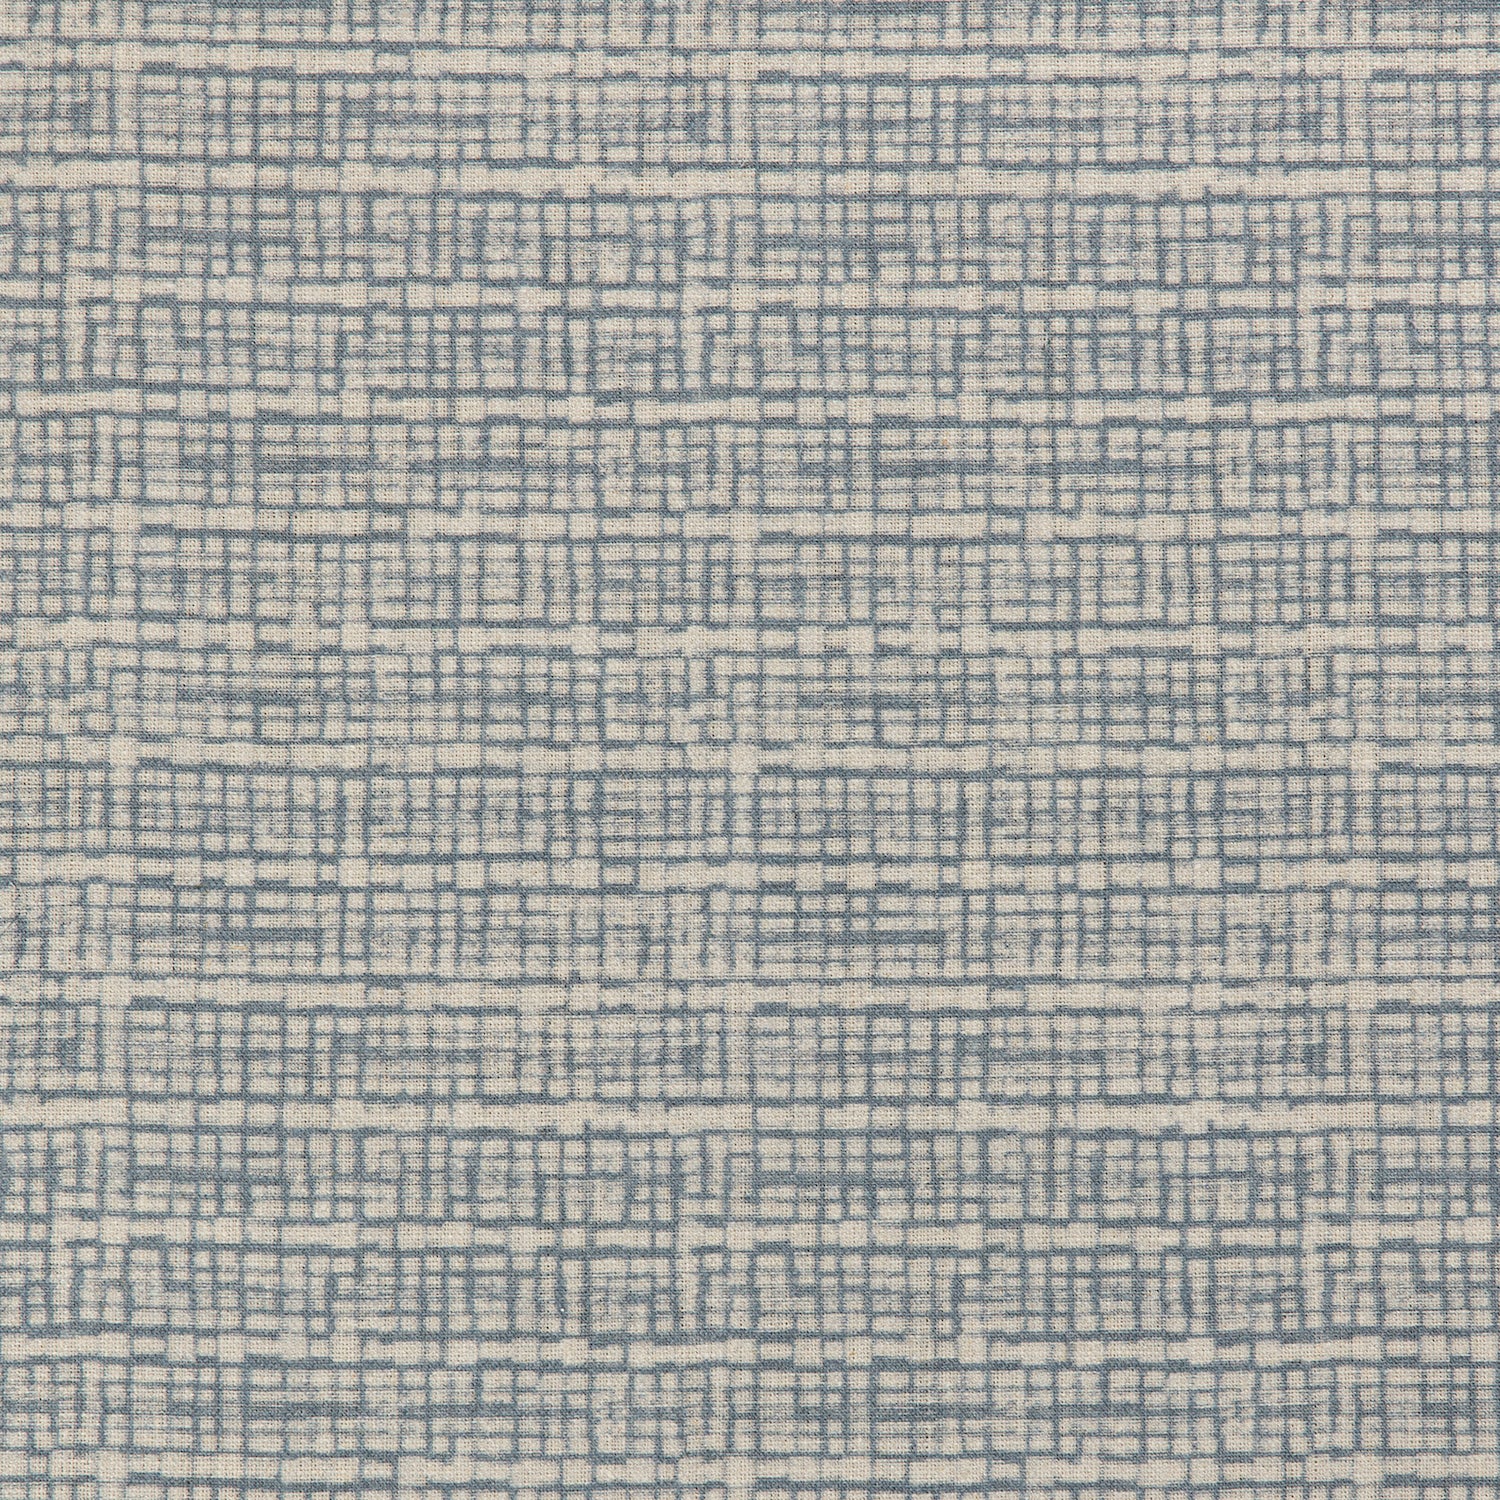 Detail of a linen fabric in a repeating abstract gridded pattern in navy on a cream field.